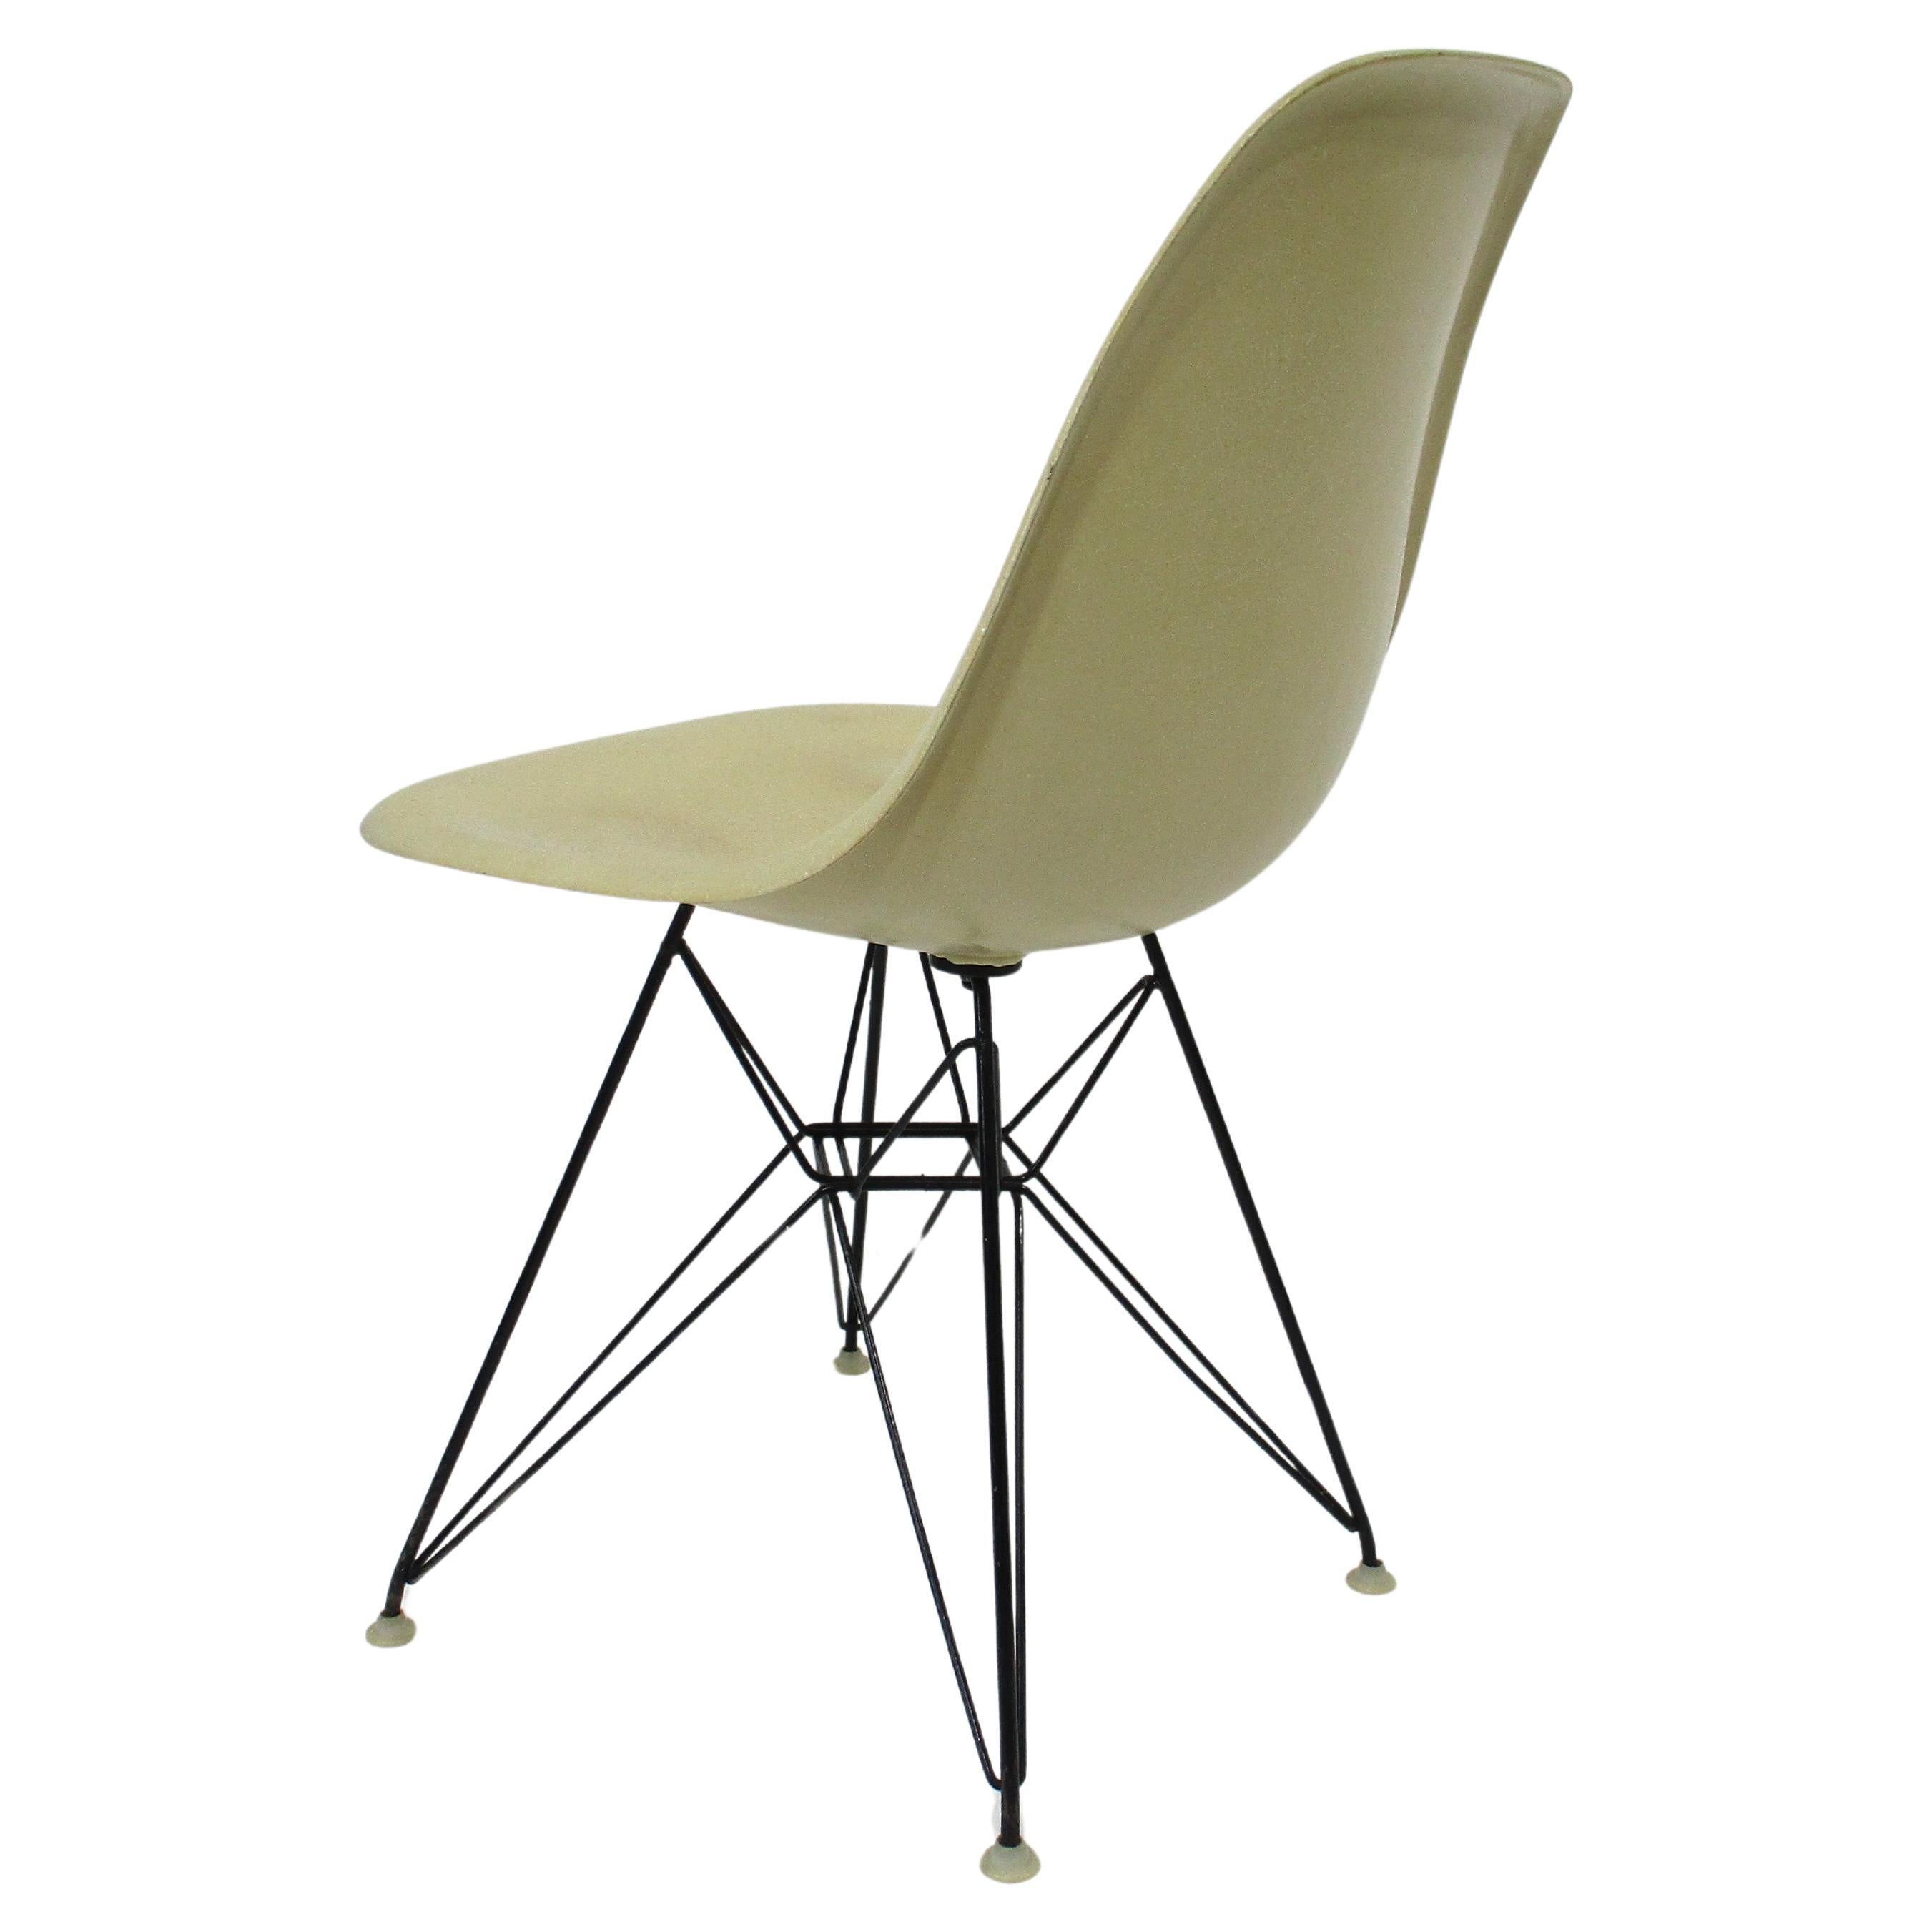 A parchment cream colored fiberglass desk chair with the satin black wire Eiffel tower base . The base has nylon foot pads to protect your floors and the slim and light look has great ergonomics for long periods of comfortable sitting . Designed by